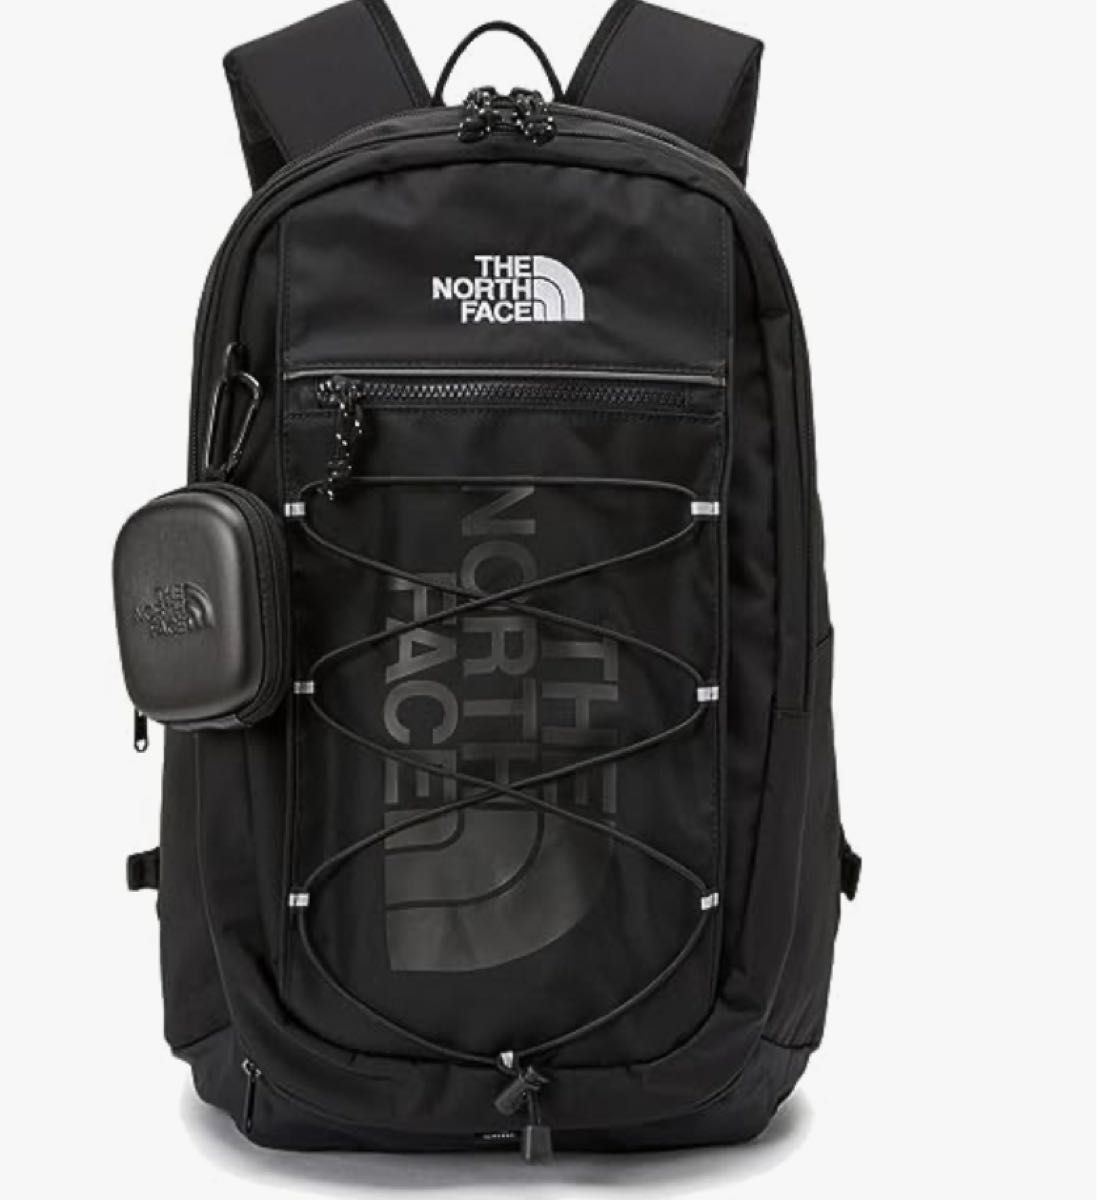 THE NORTHFACE SUPER PACK 30L バックパック